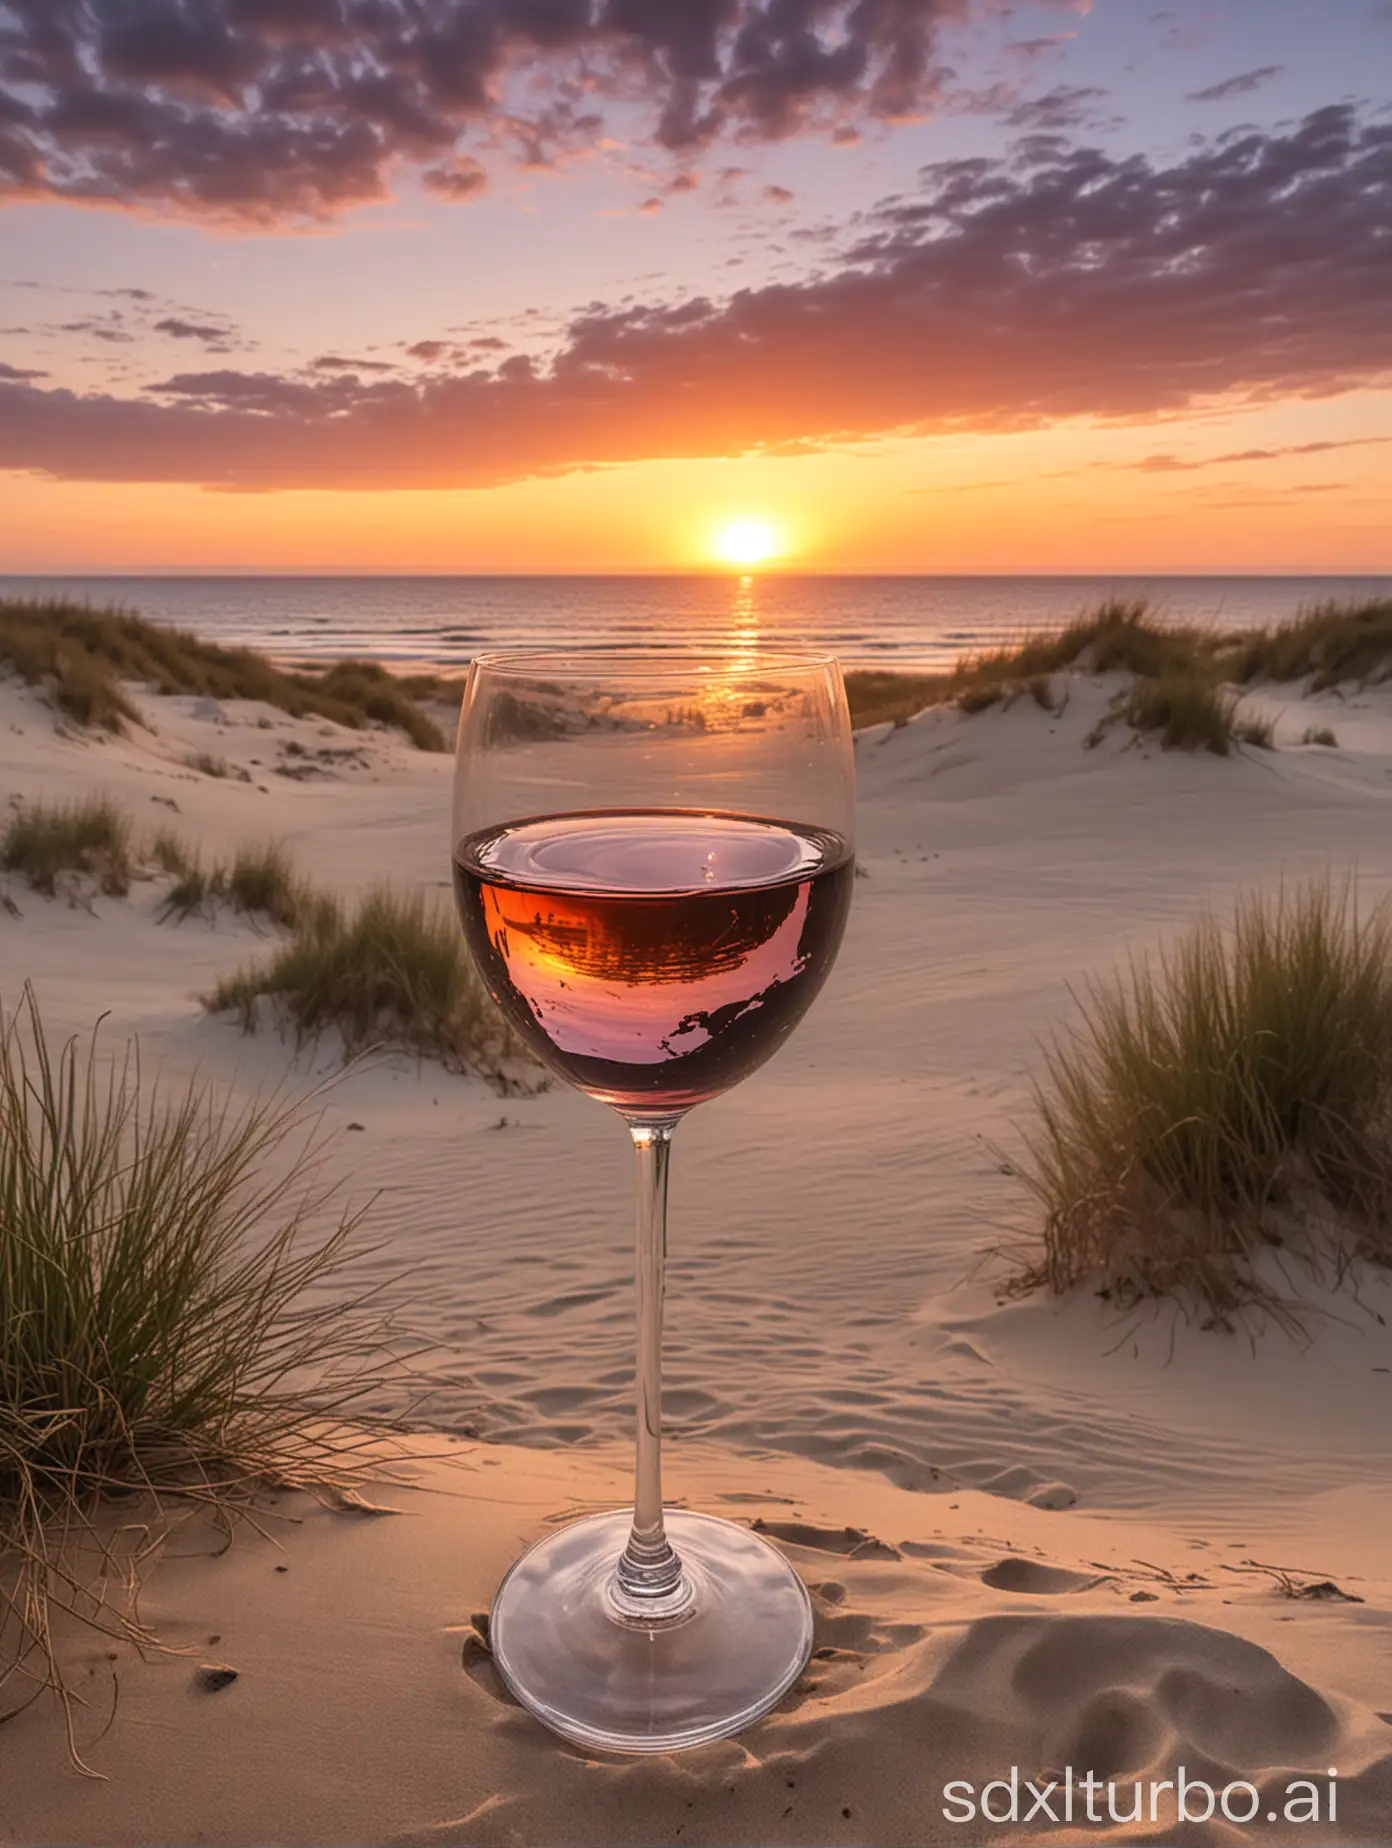 Sunset in the dunes by the sea with a glass of wine